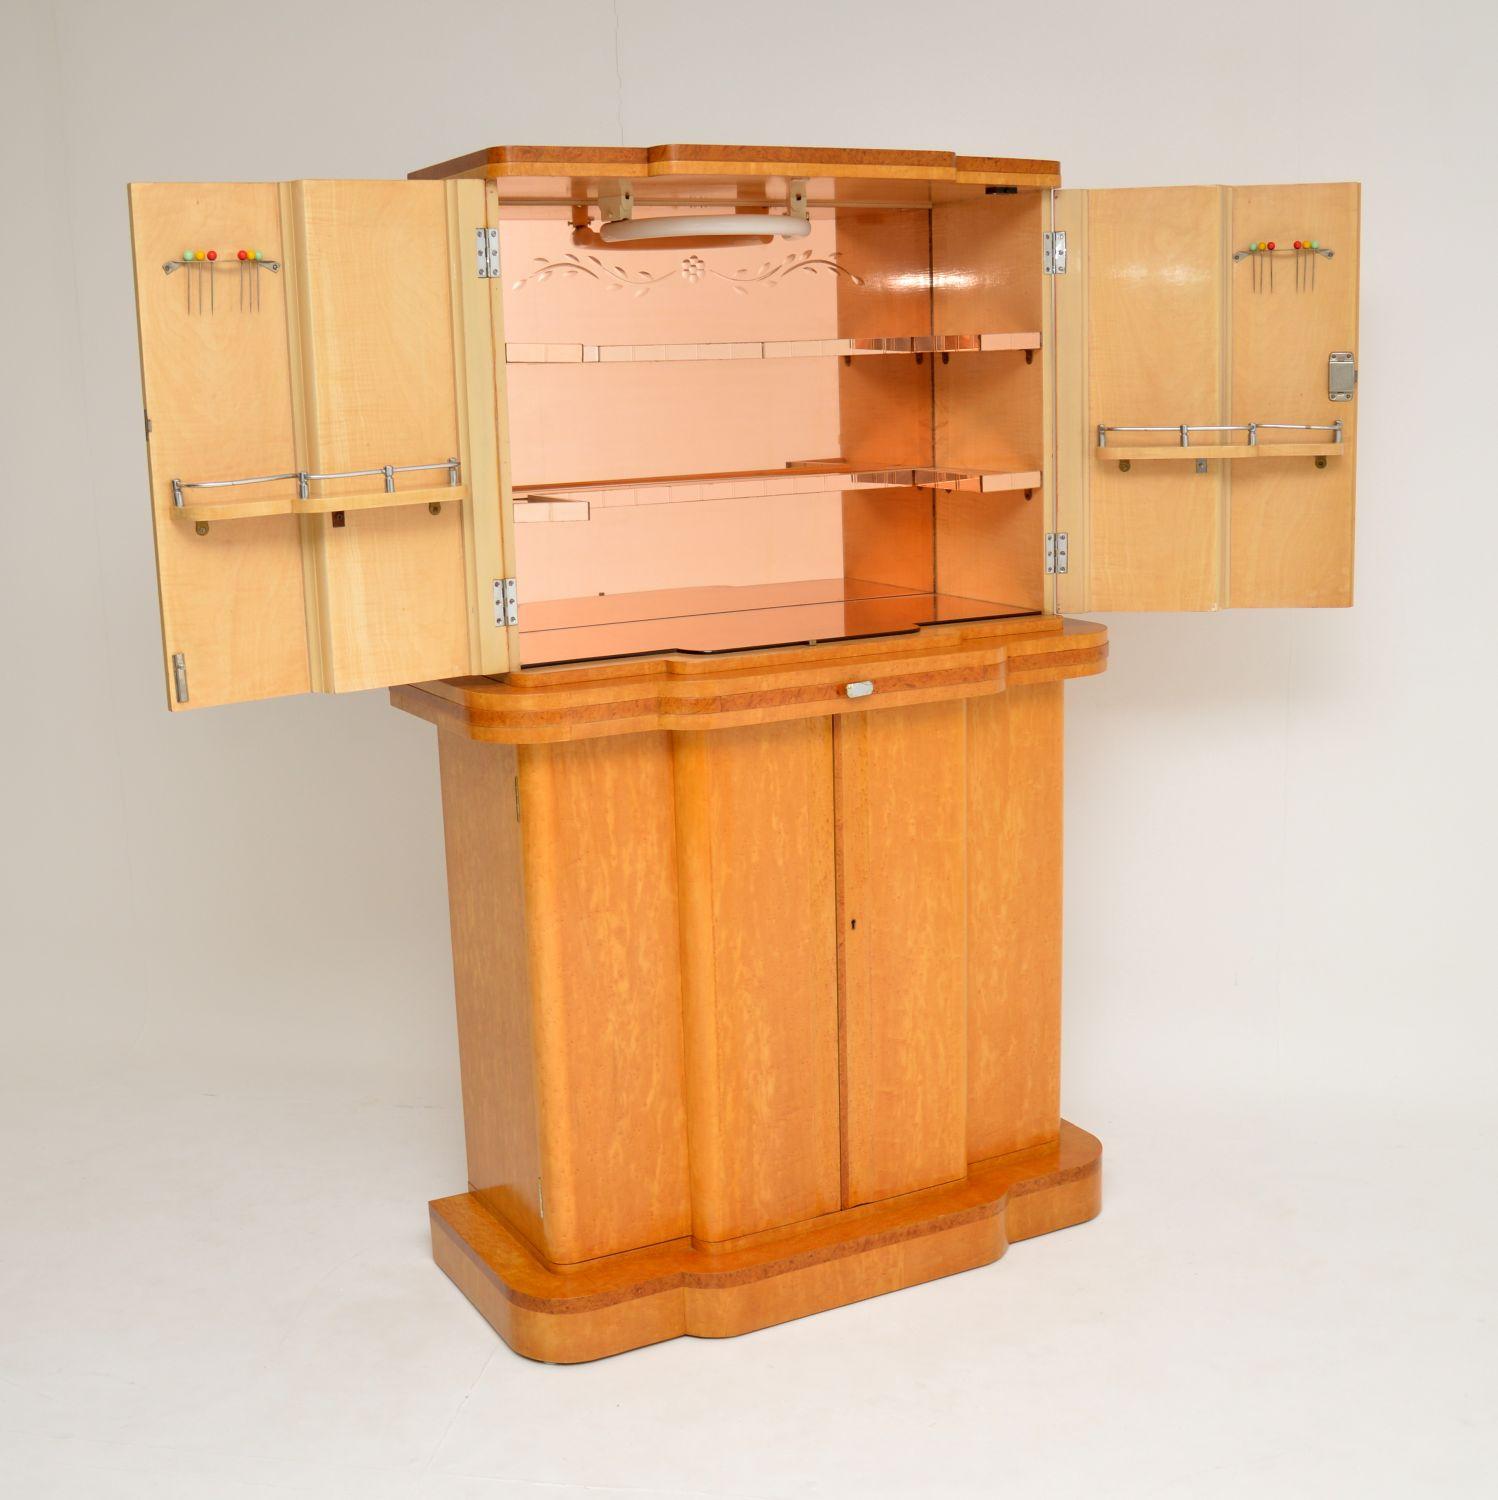 An absolutely stunning and top quality original Art Deco cocktail cabinet, made by Epstein in the 1920s-1930s. This has a gorgeous design and has many fine features.

This is predominantly made from lovely burr maple, with burr walnut trim. We